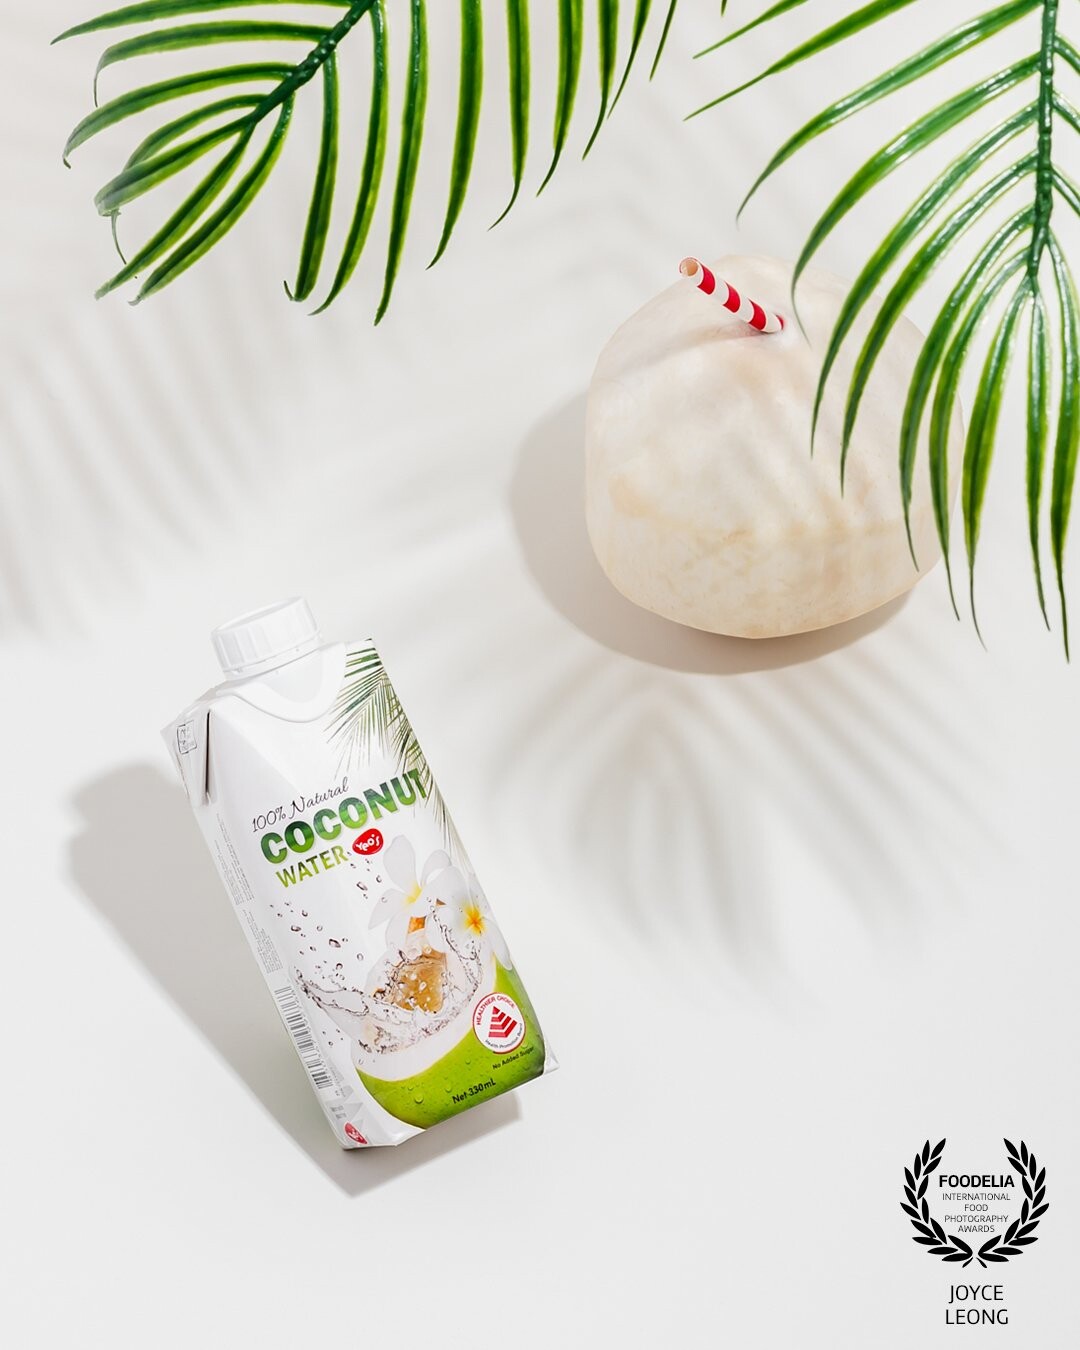 Created this image as part of a set of 3 to depict the bright sunshine feel associated with a cooling drink such as coconut water!